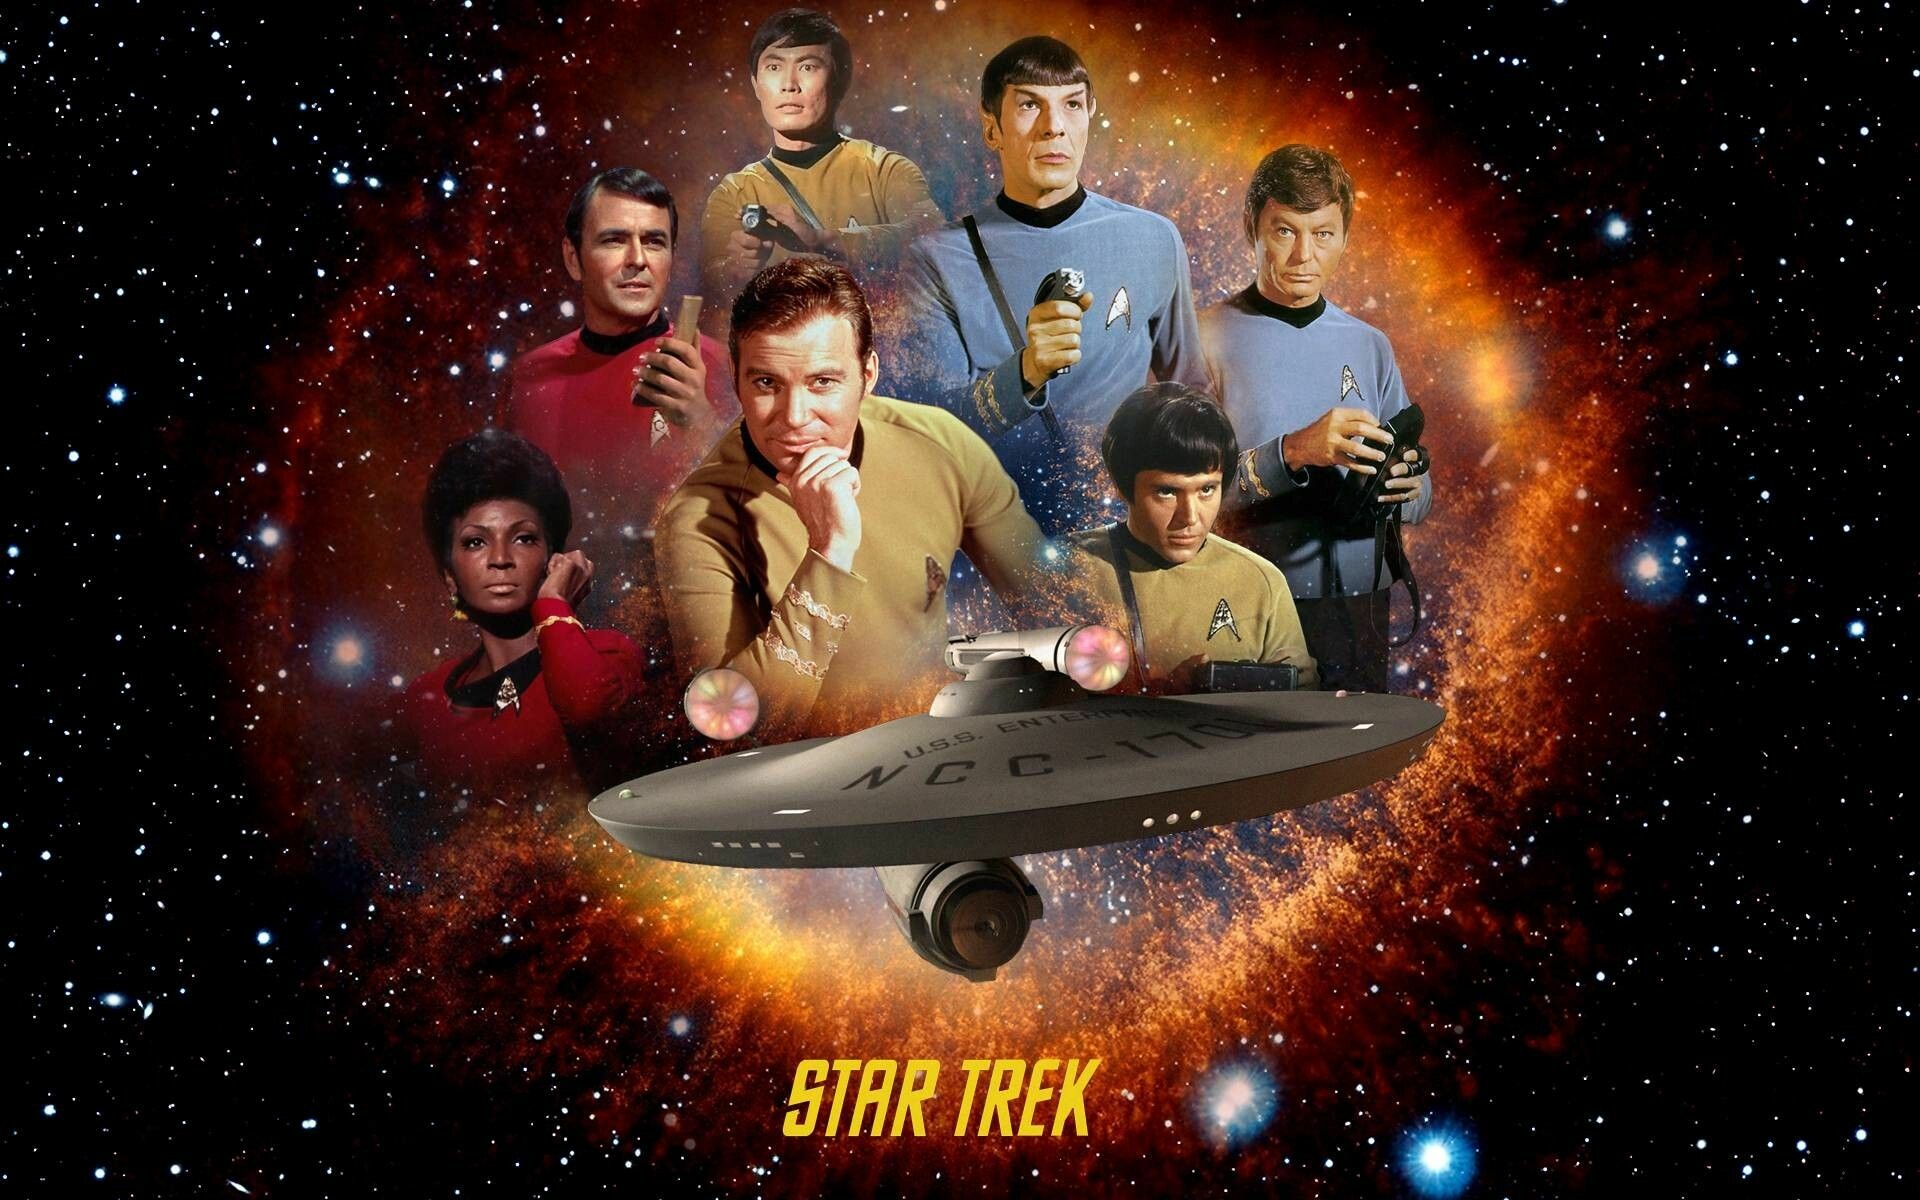 Star Trek: TOS, The adventures of the starship USS Enterprise NCC-1701 and its crew. 1920x1200 HD Wallpaper.